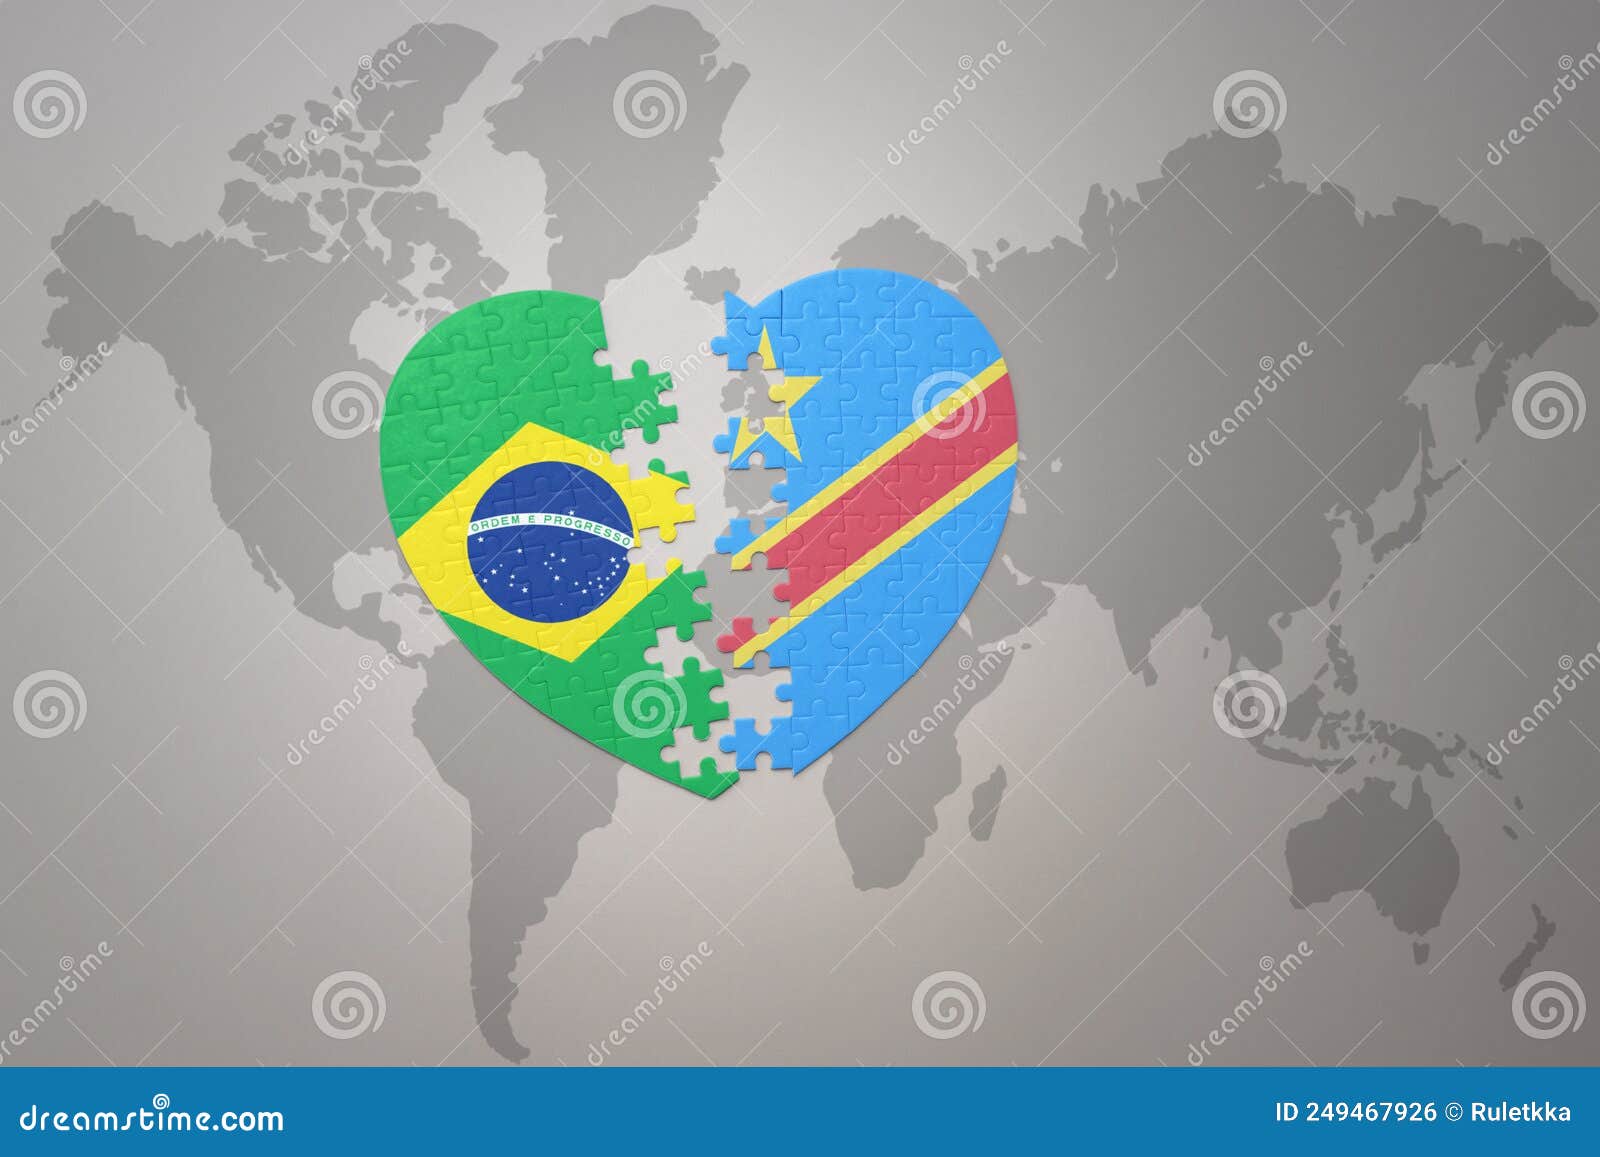 puzzle heart with the national flag of brazil and democratic republic of the congo on a world map background.concept